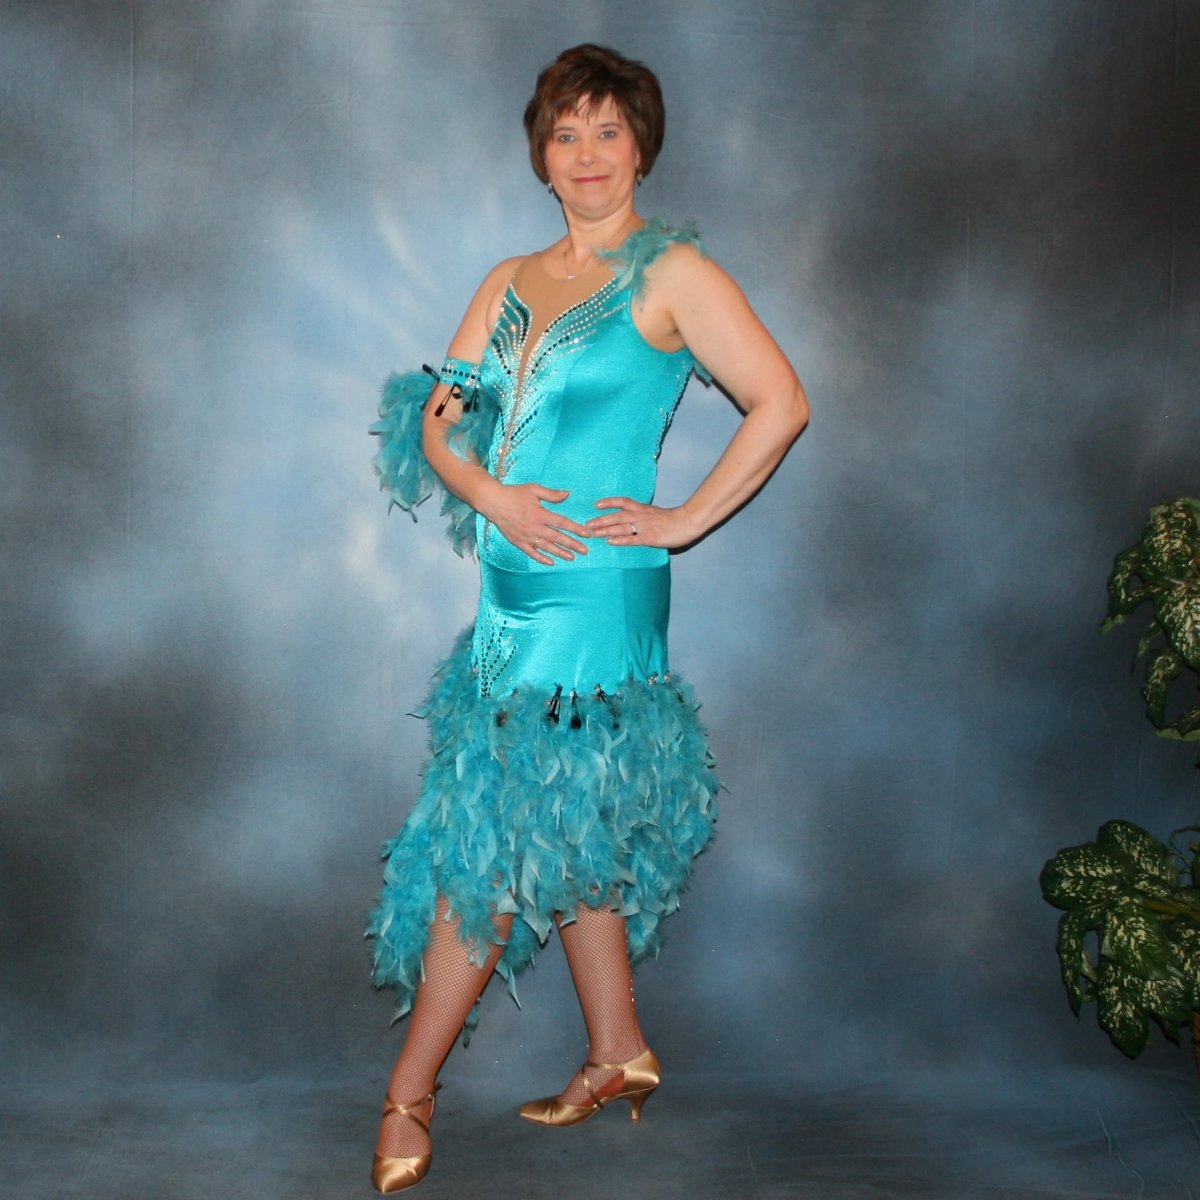 side view of Turquoise Latin/rhythm dance dress created in turquoise lycra on nude illusion, is embellished with crystal and jet black Swarovski rhinestones, with chandelle feathers and black spangles. The v styled skirt slits up high on both sides. Matching arm bands complete the look.